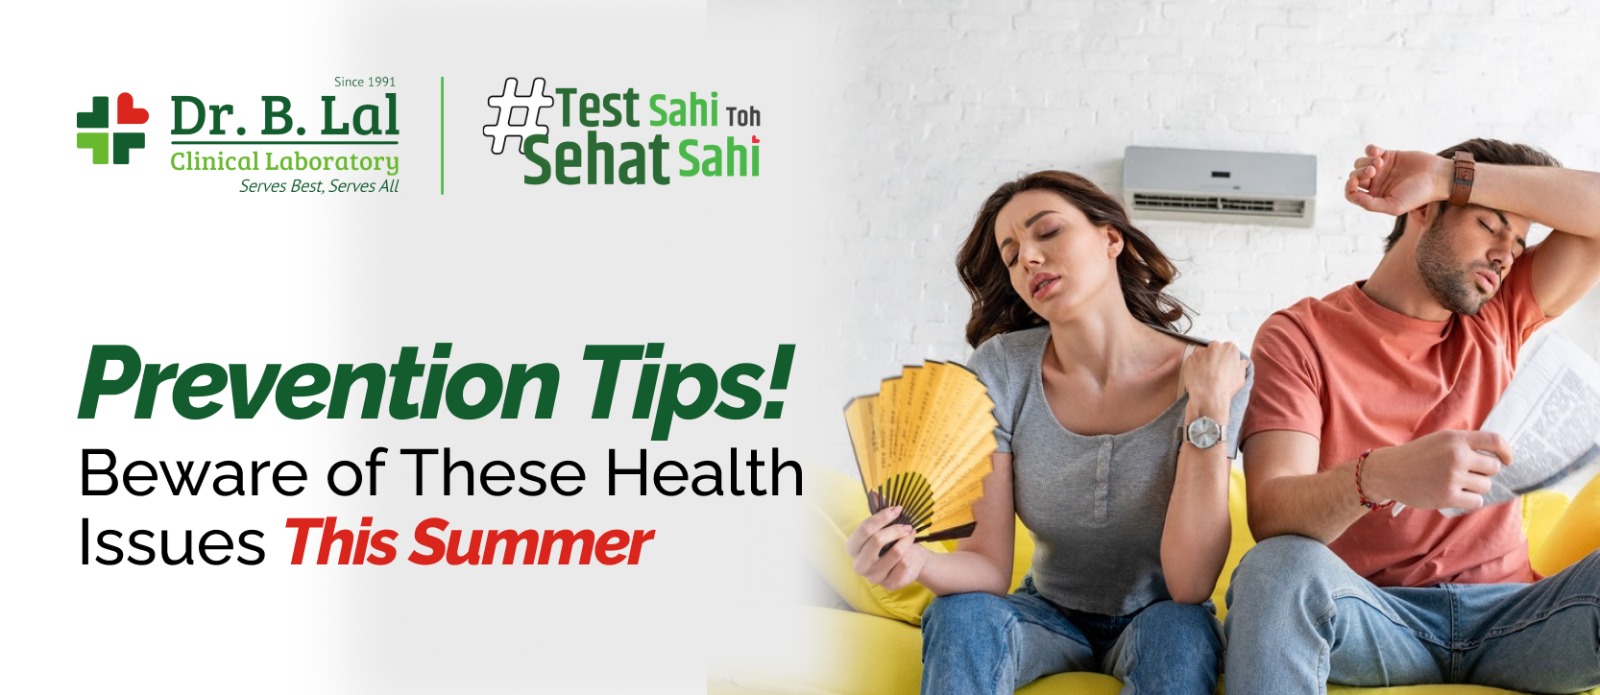 Beware of These Health Issues This Summer: Prevention Tips!